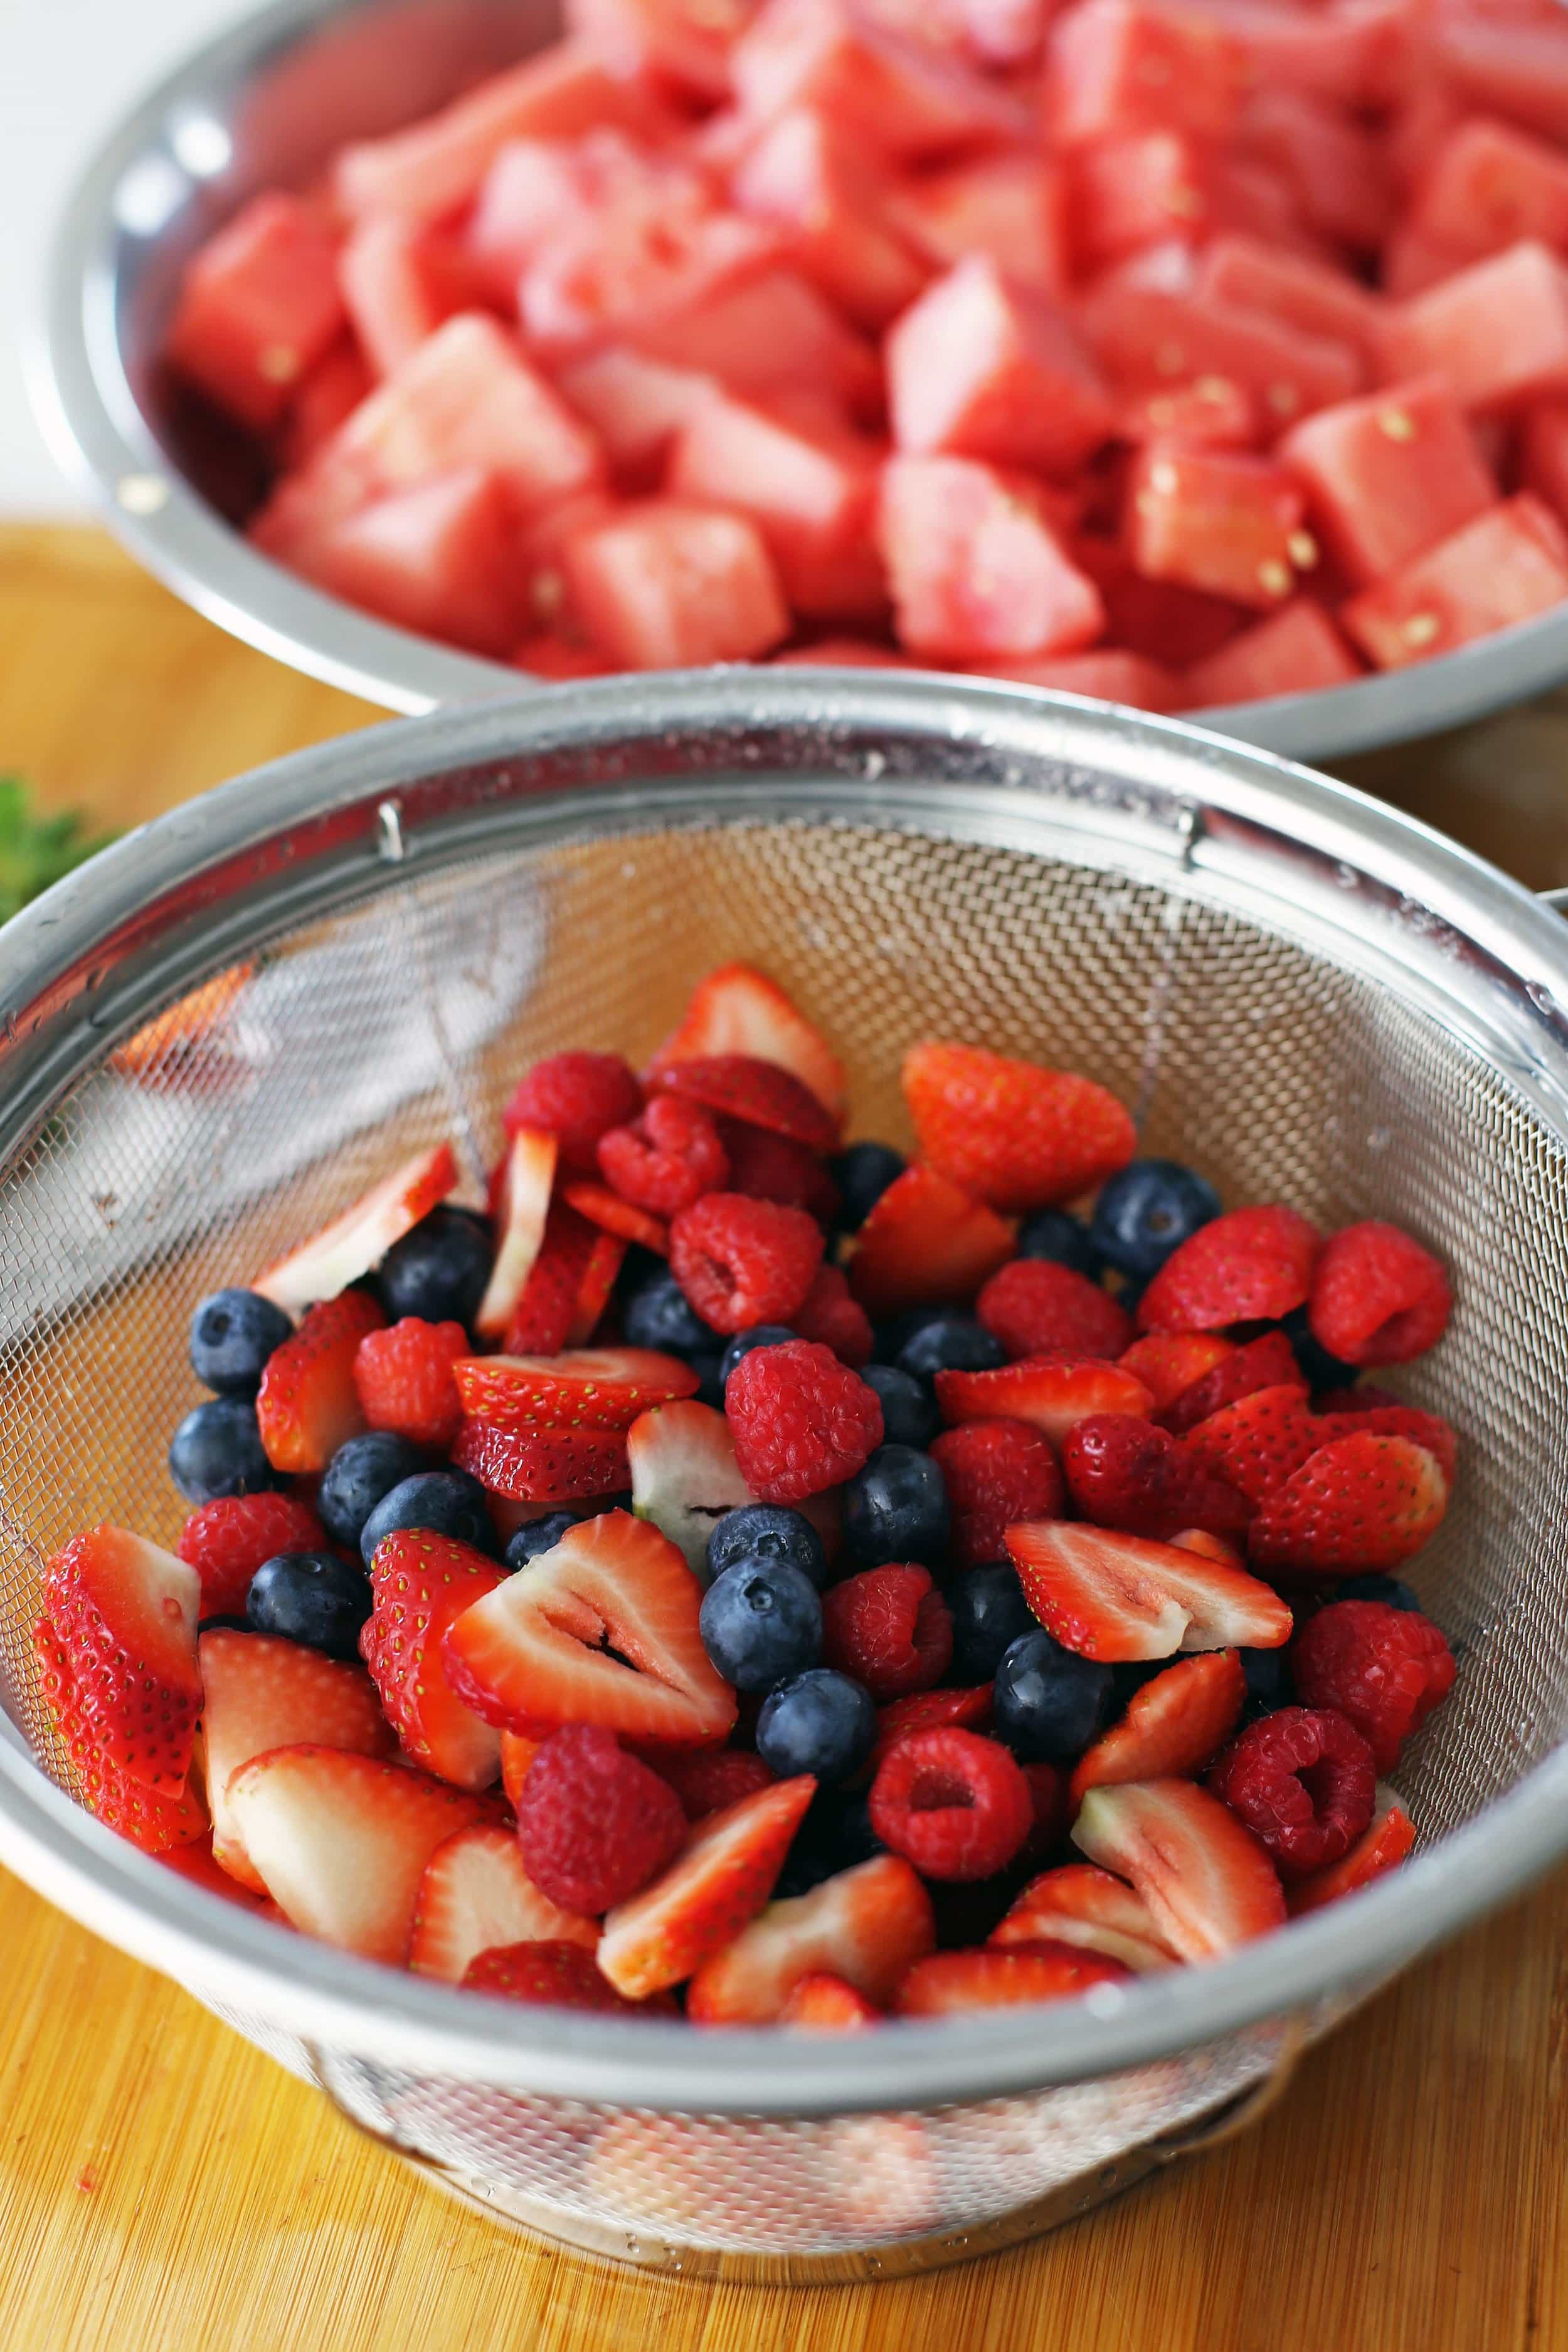 Rinsed sliced strawberries, blueberries, and raspberries in a metal stainer with a bowl of watermelon pieces behind it.